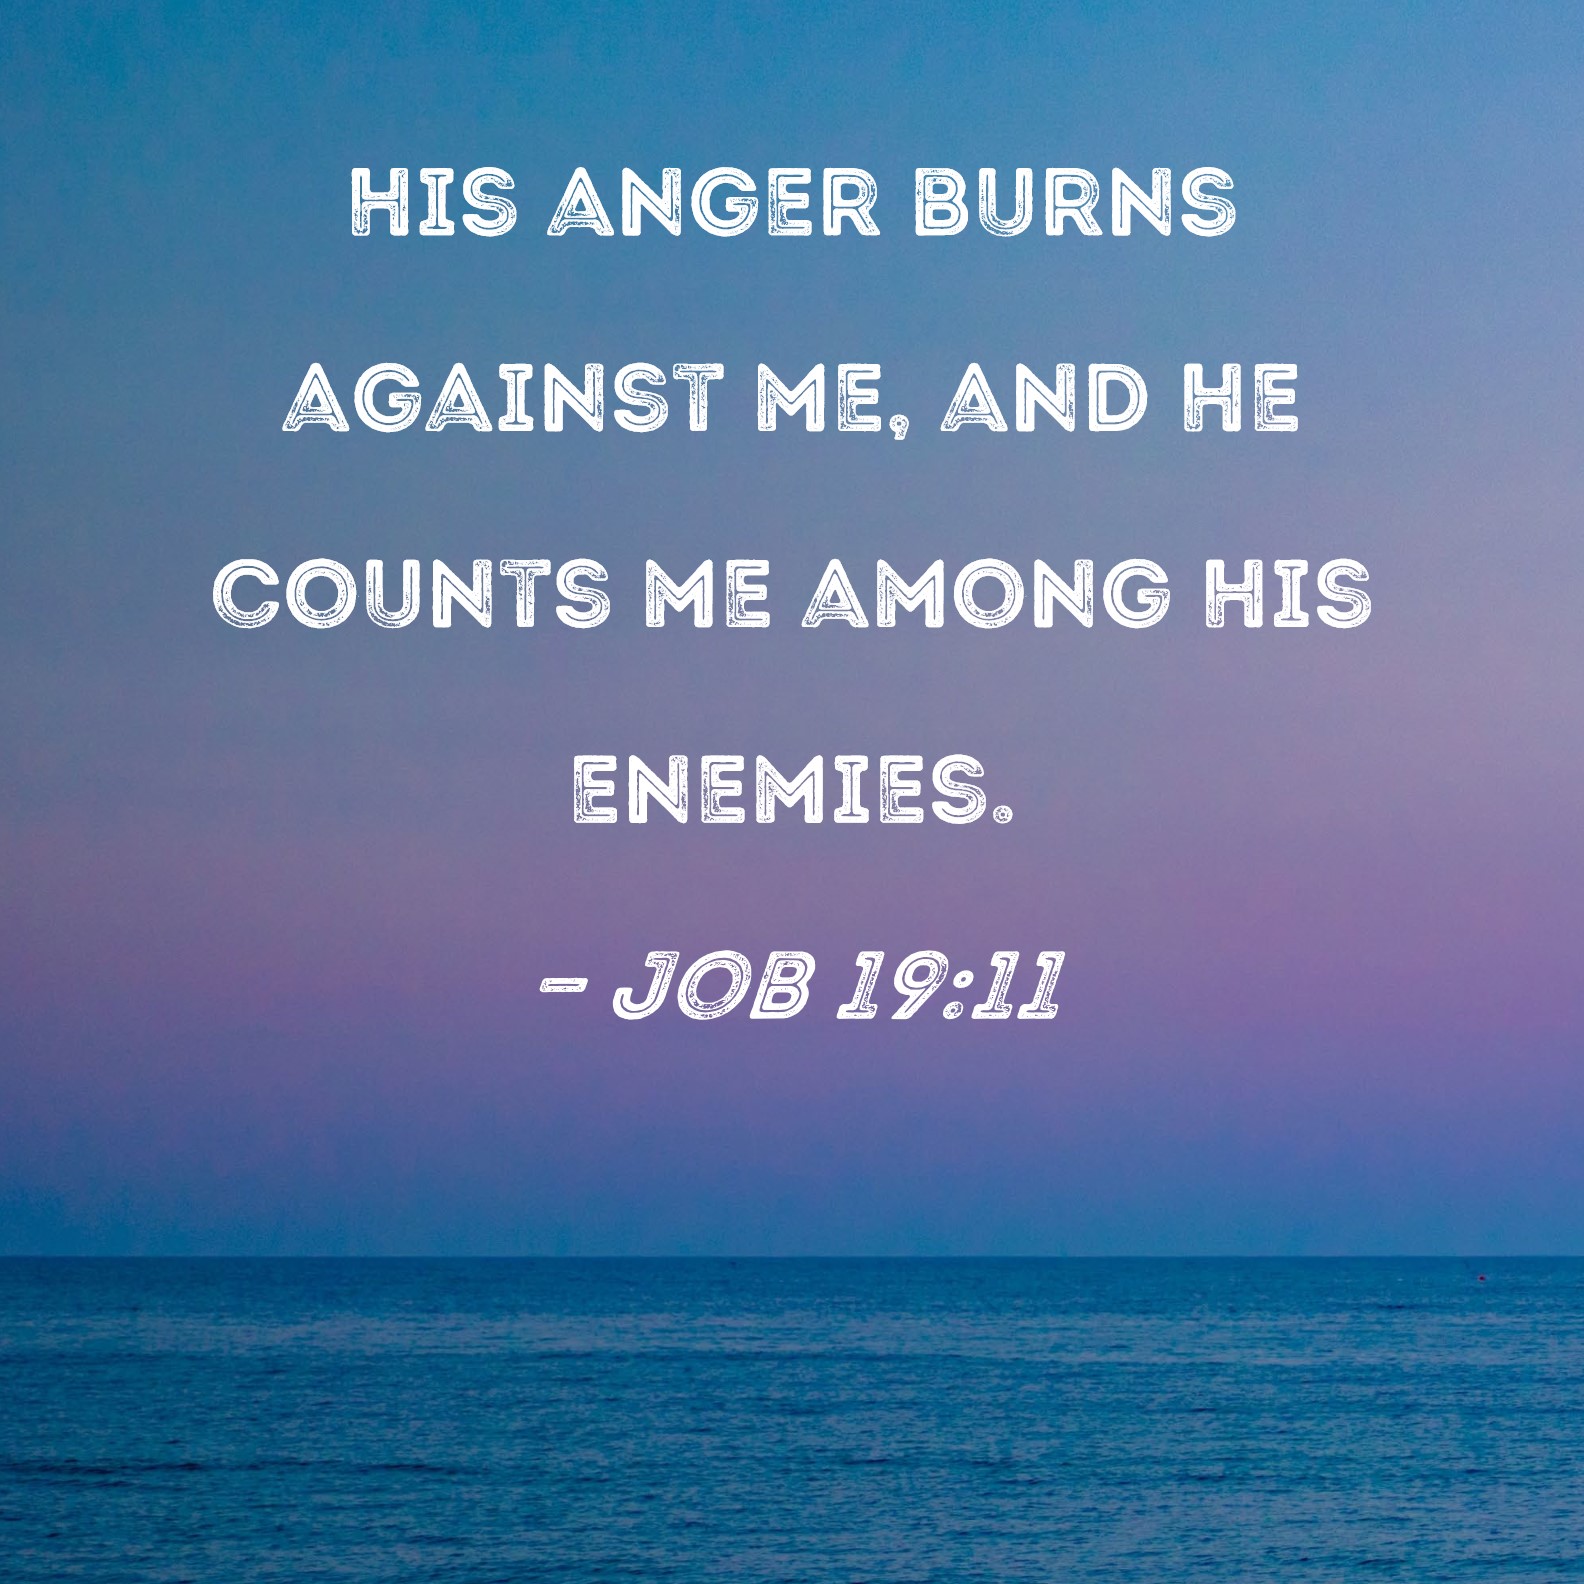 Job 1911 His anger burns against me, and He counts me among His enemies.